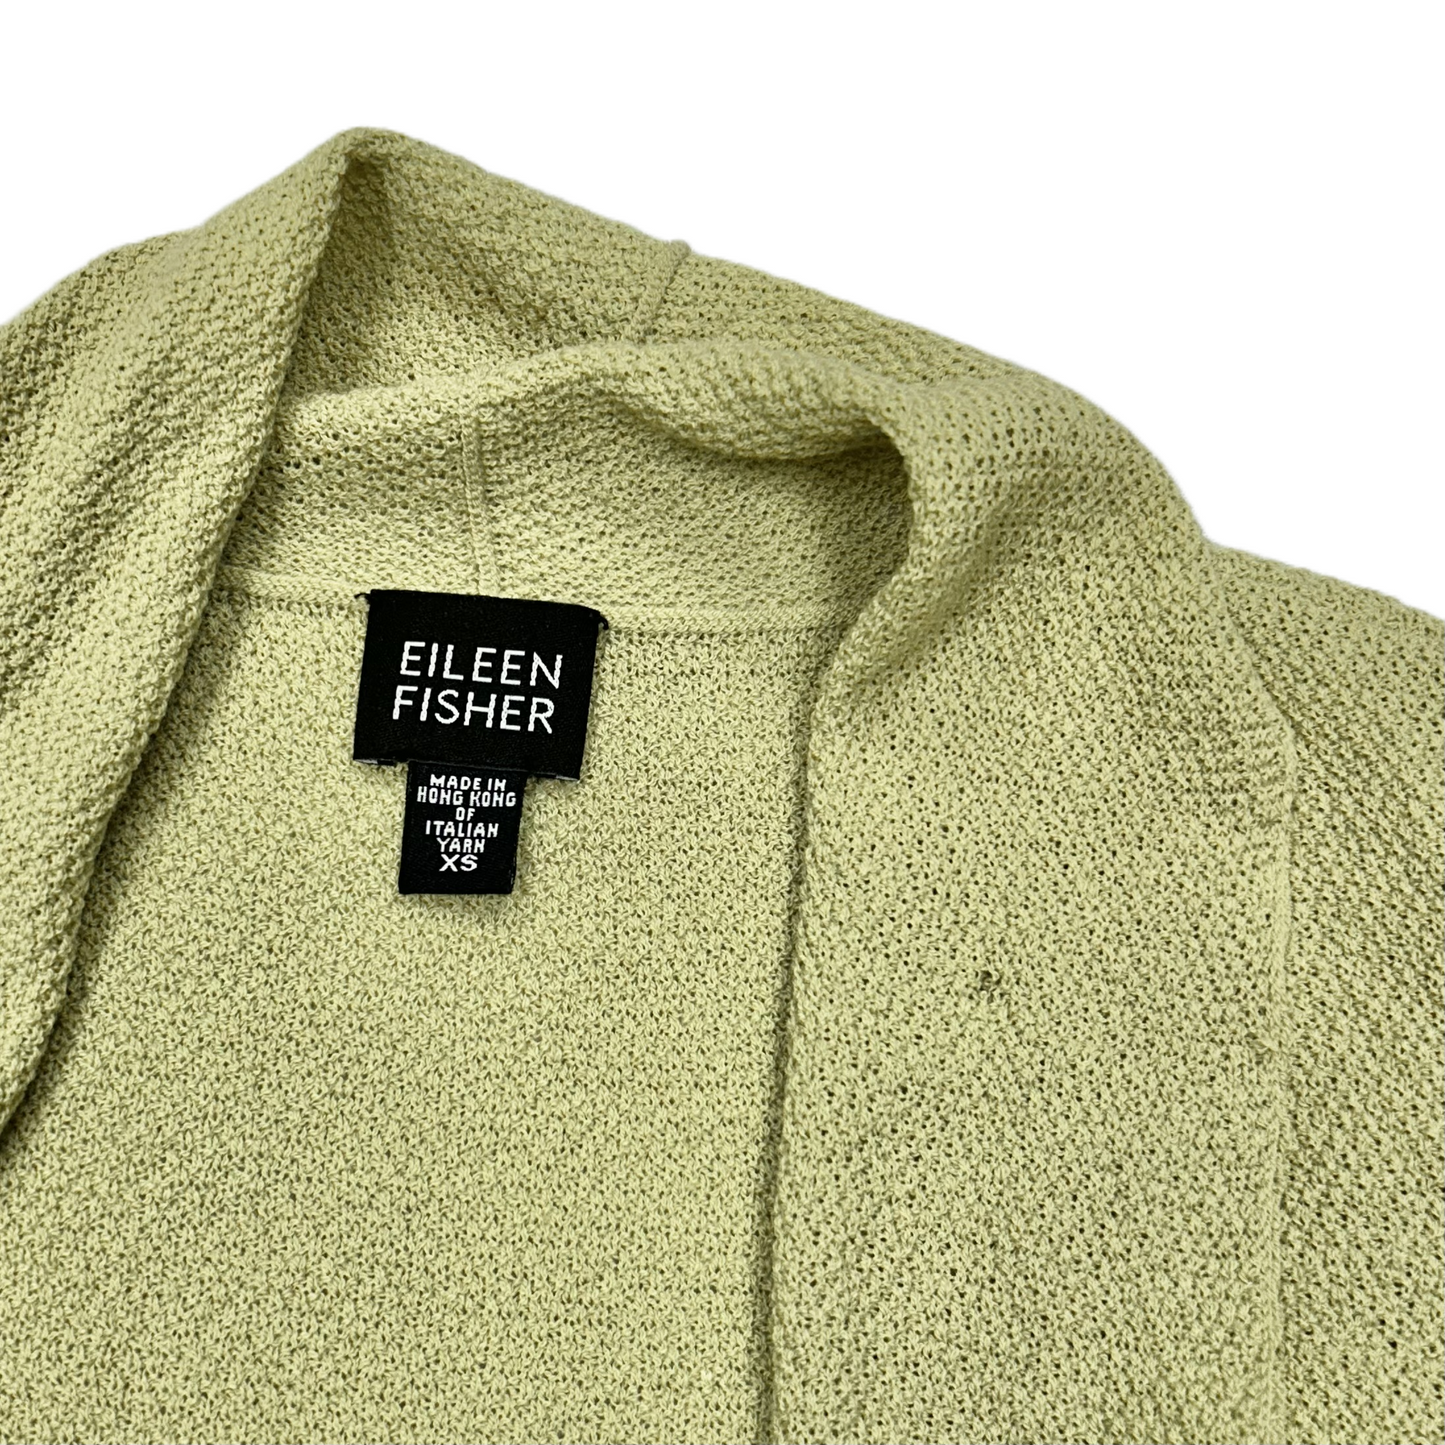 Cardigan By Eileen Fisher  Size: Xs